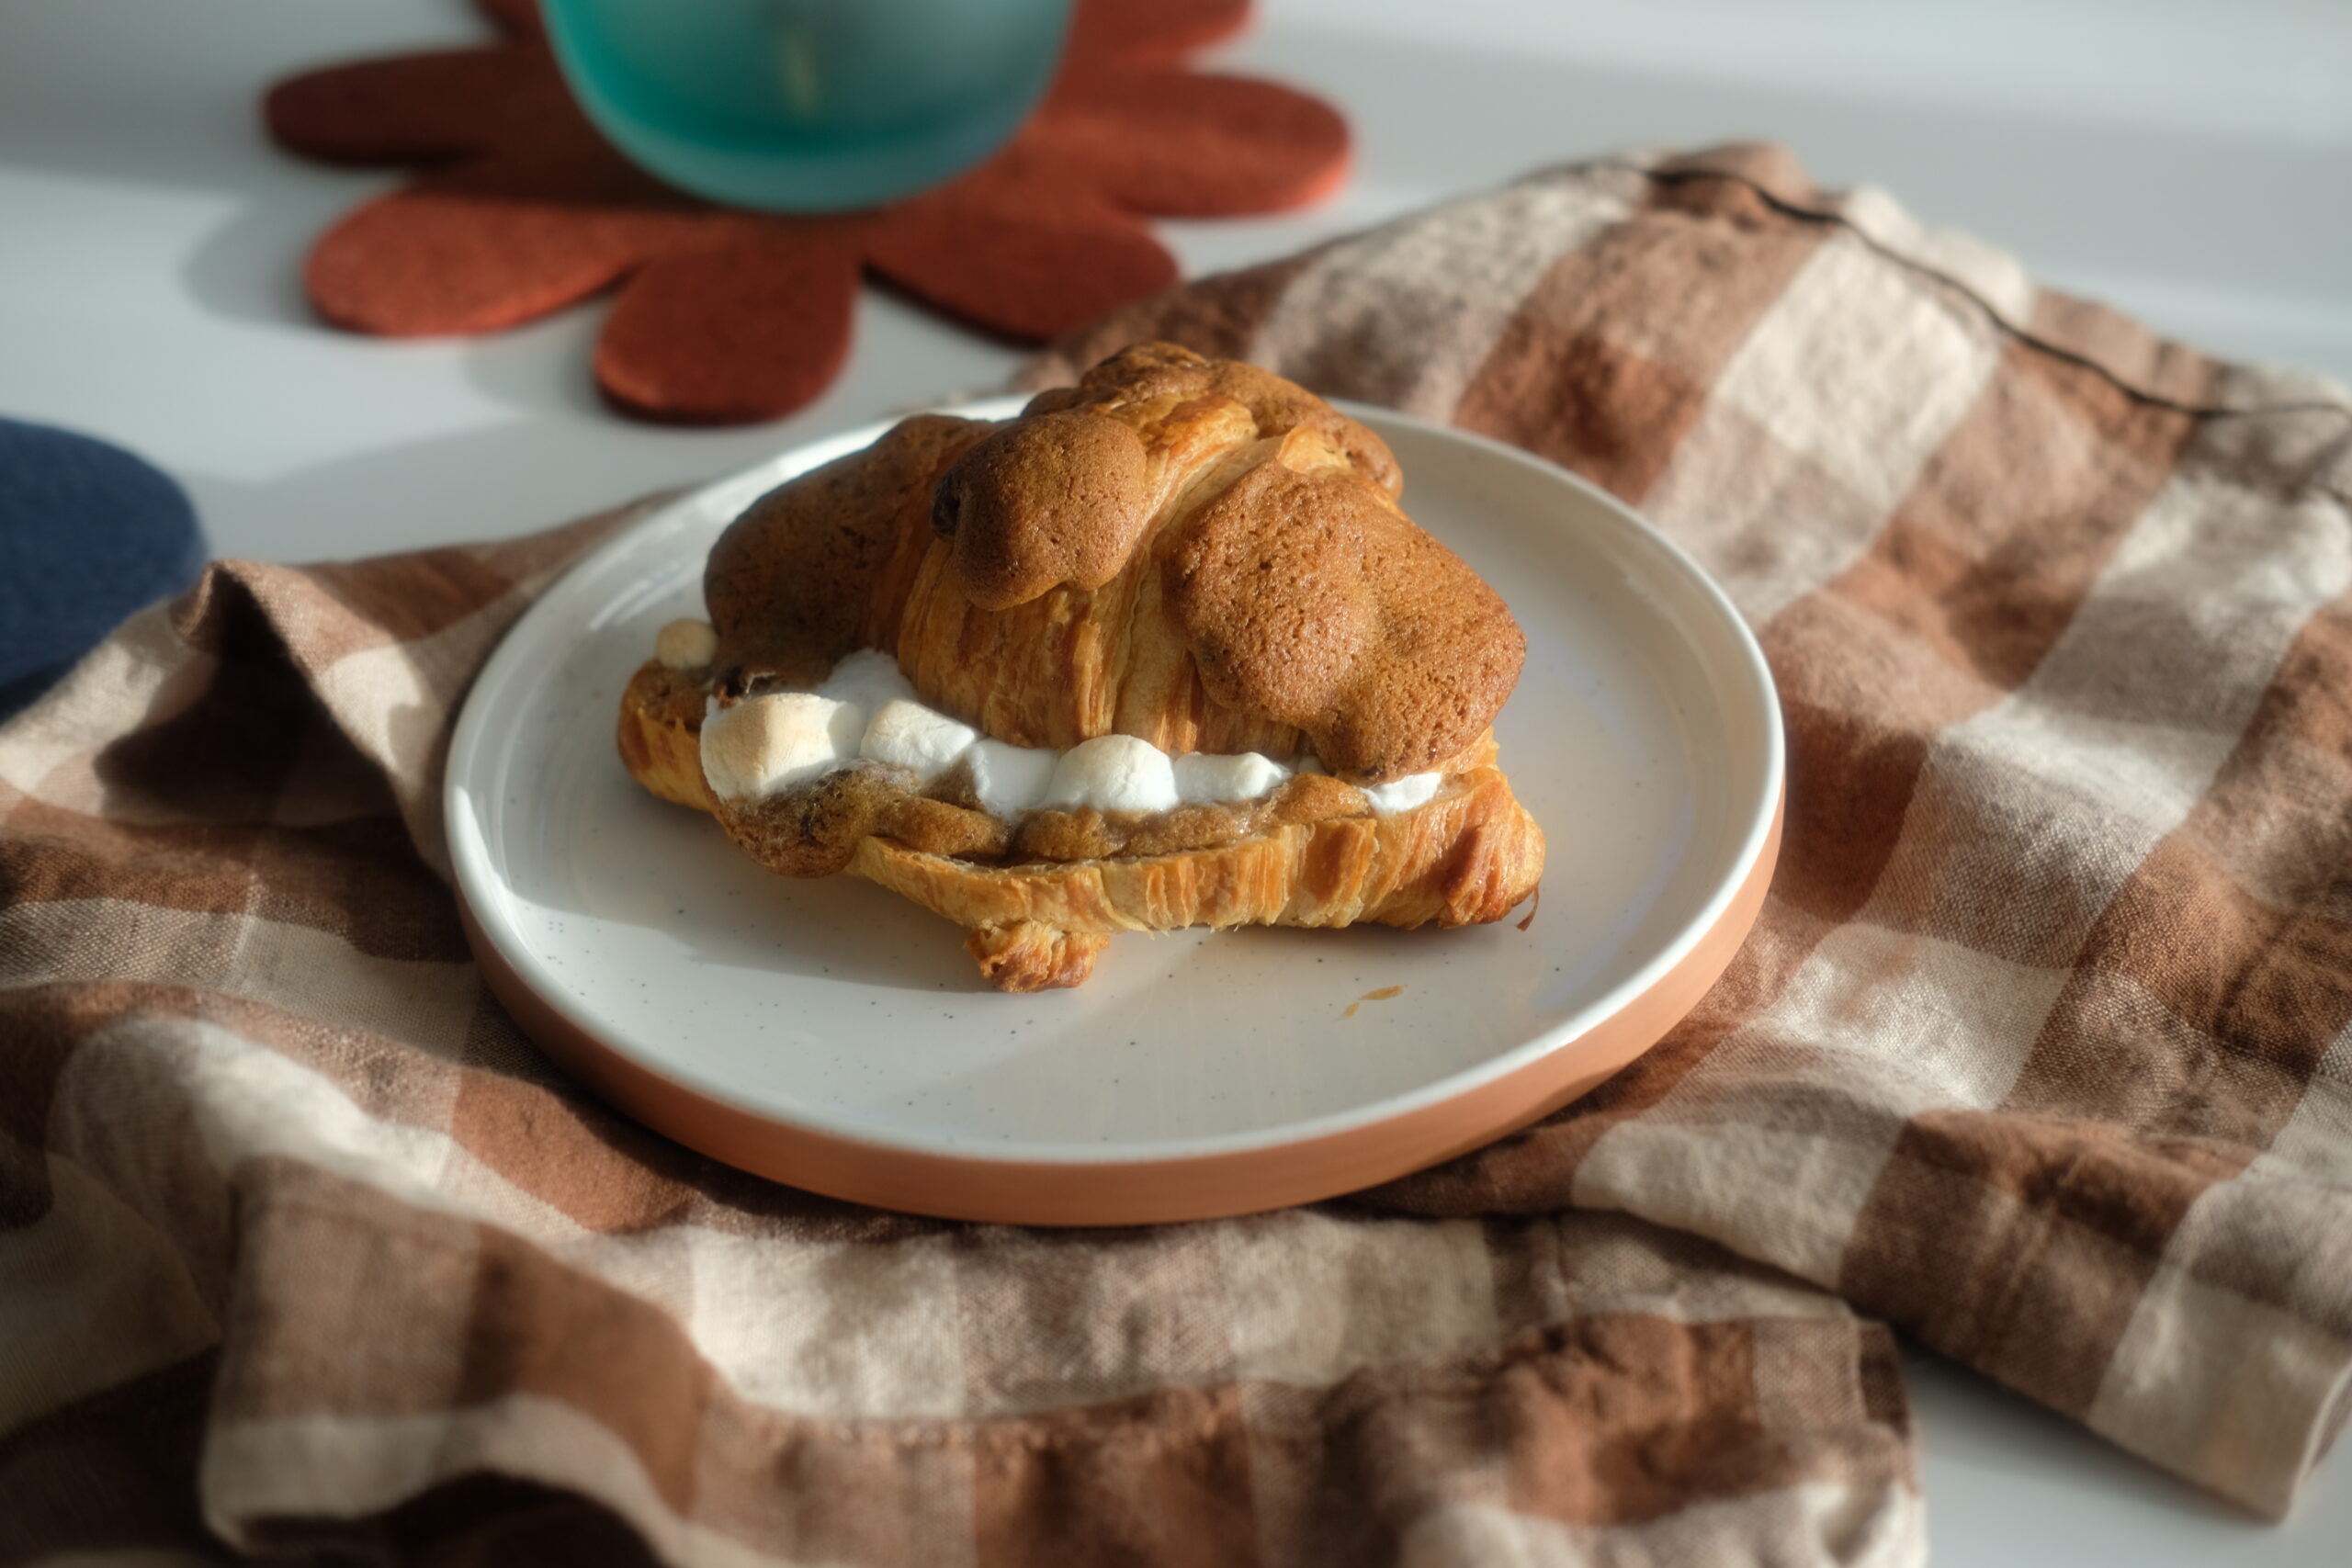 This feels illegal to share, but… have you seen the viral Cookie Croissant recipes adapted from the bakery in France?